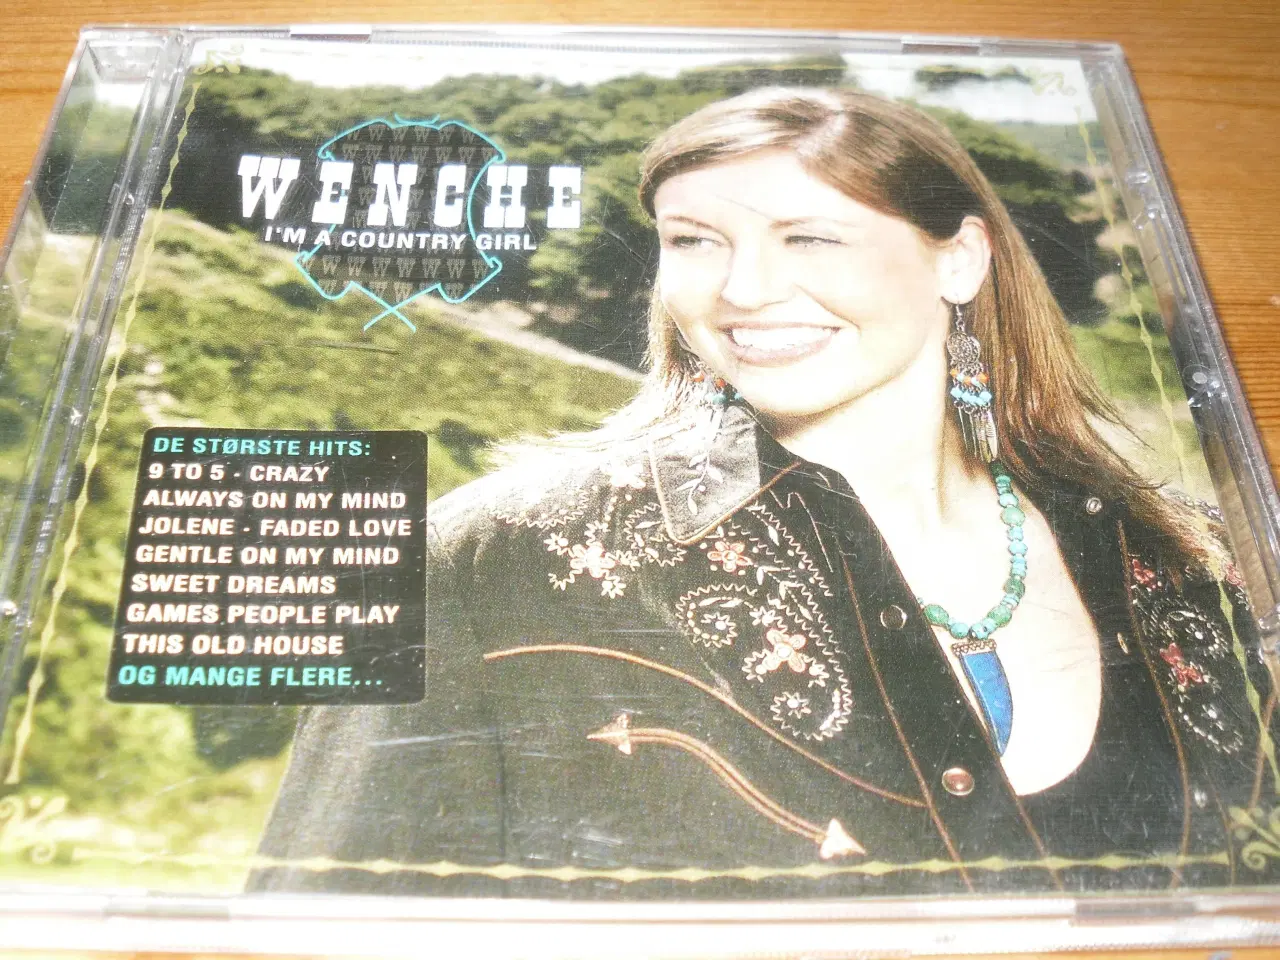 Billede 2 - WENCHE; I`m a Country Girl.